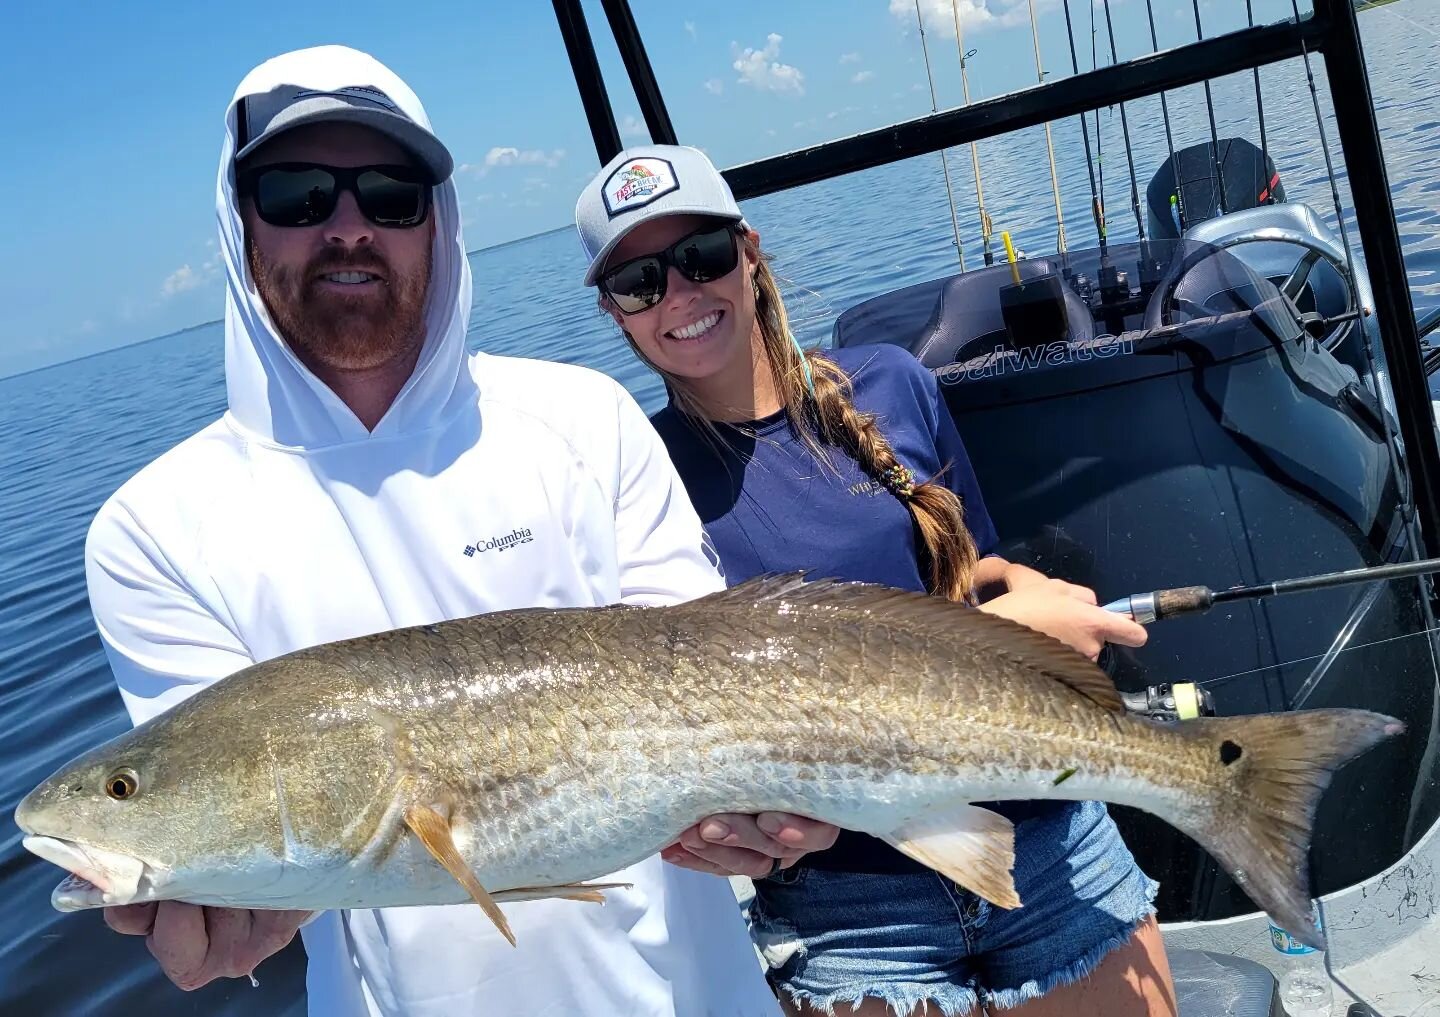 Got the opportunity to help newly married @taylormadefishing and @tayloroquinn__ start of  honey moon week. They stated they wanna do redfish NO snook No trout so we boated well over 50 keeper or over slot redfish #sscstye thanks guys for including m